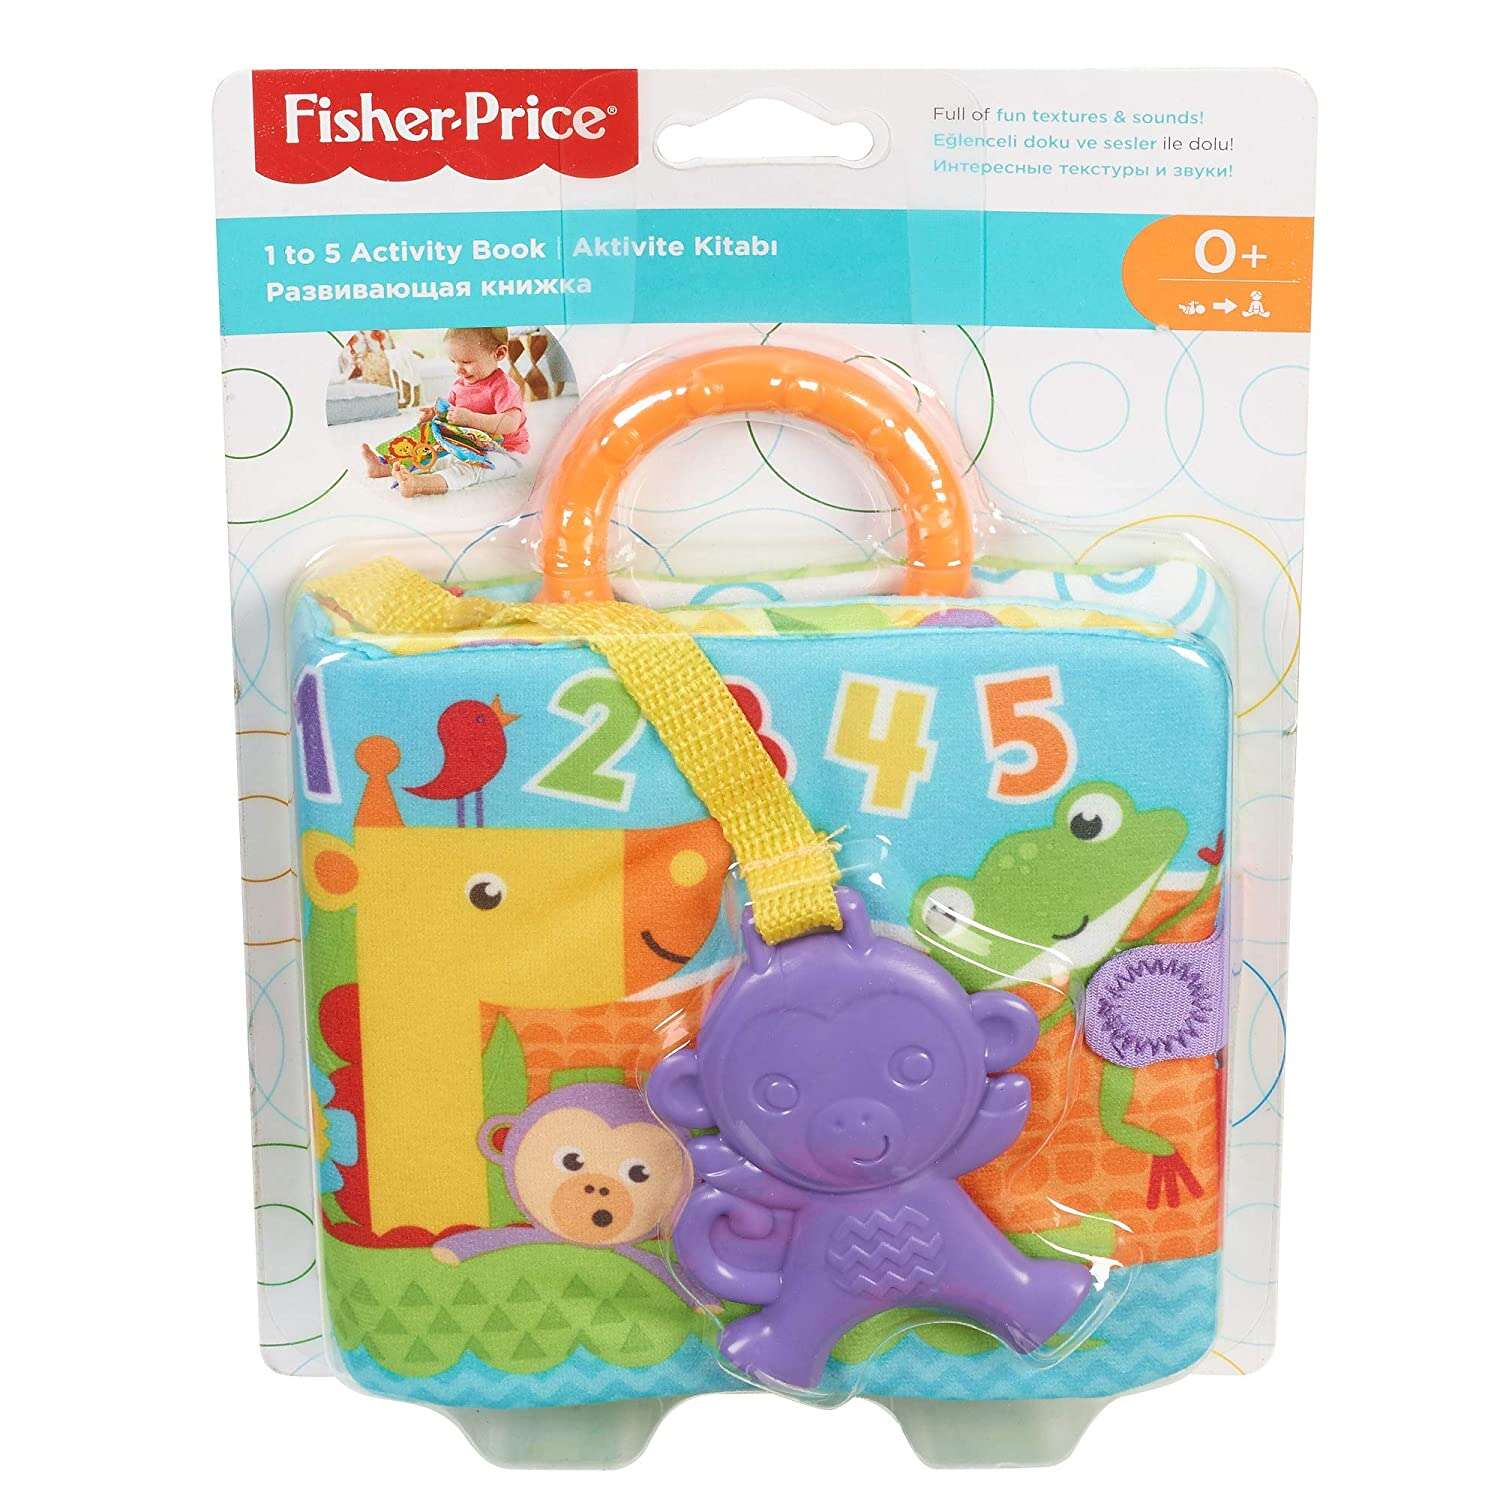 Jucarie educativa - 1 to 5 Activity Book | Fisher-Price